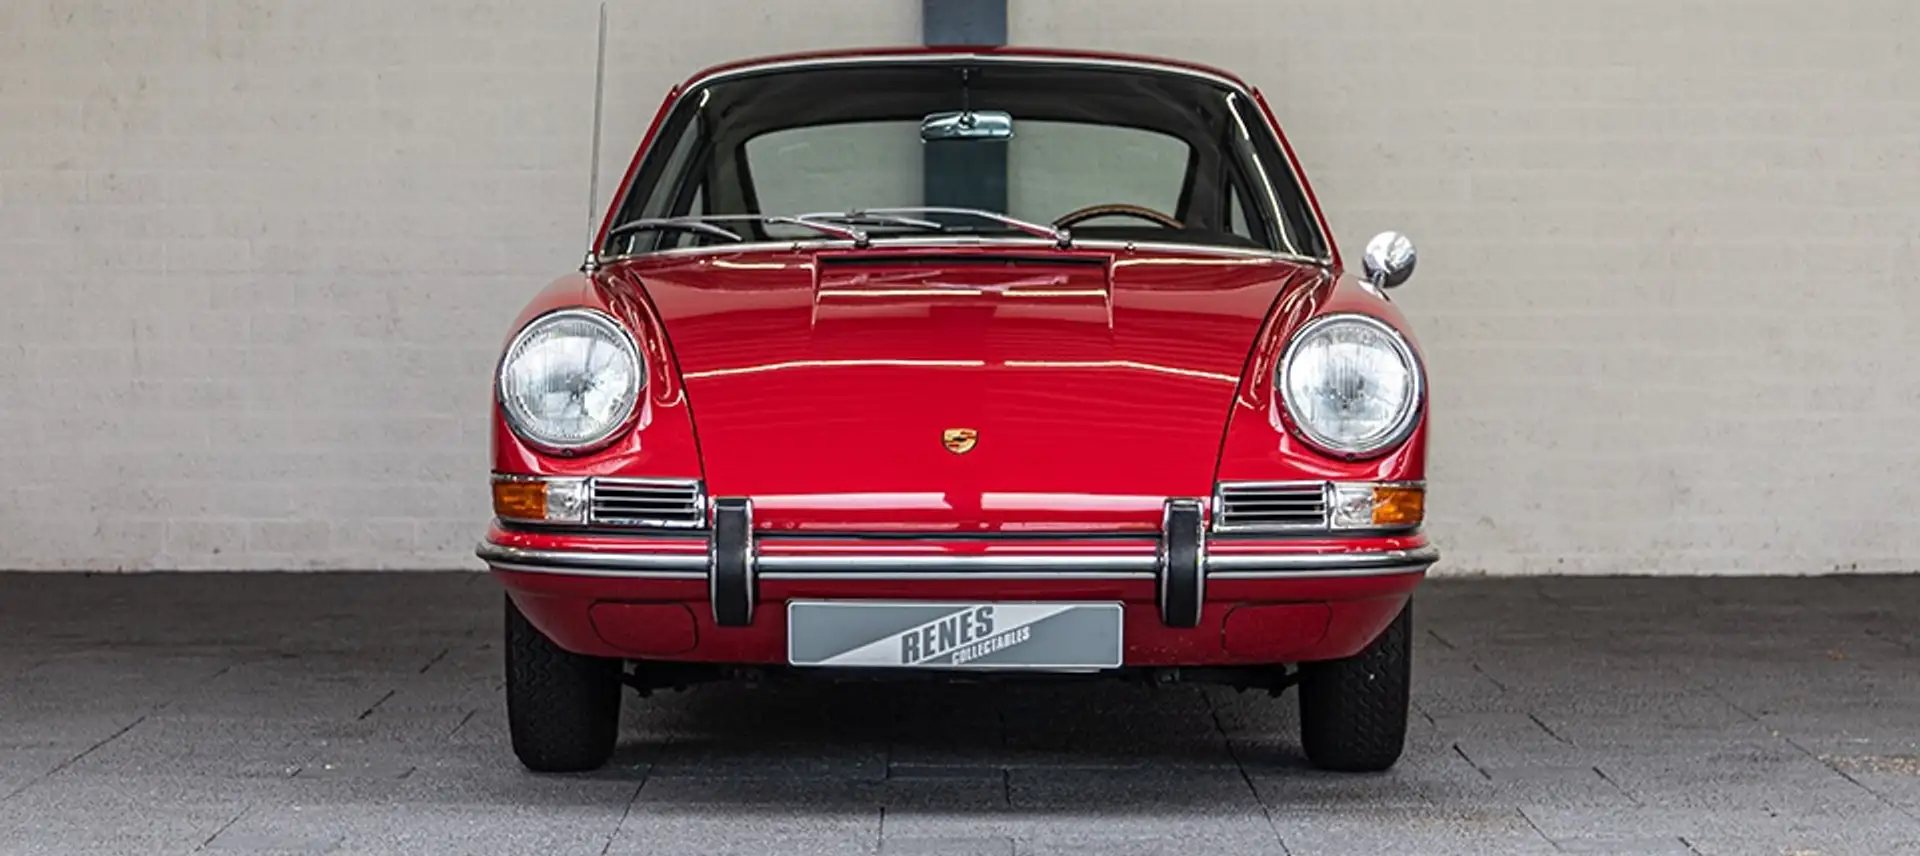 Porsche 911 1965 911 Matching Numbers German first delivery Red - 2